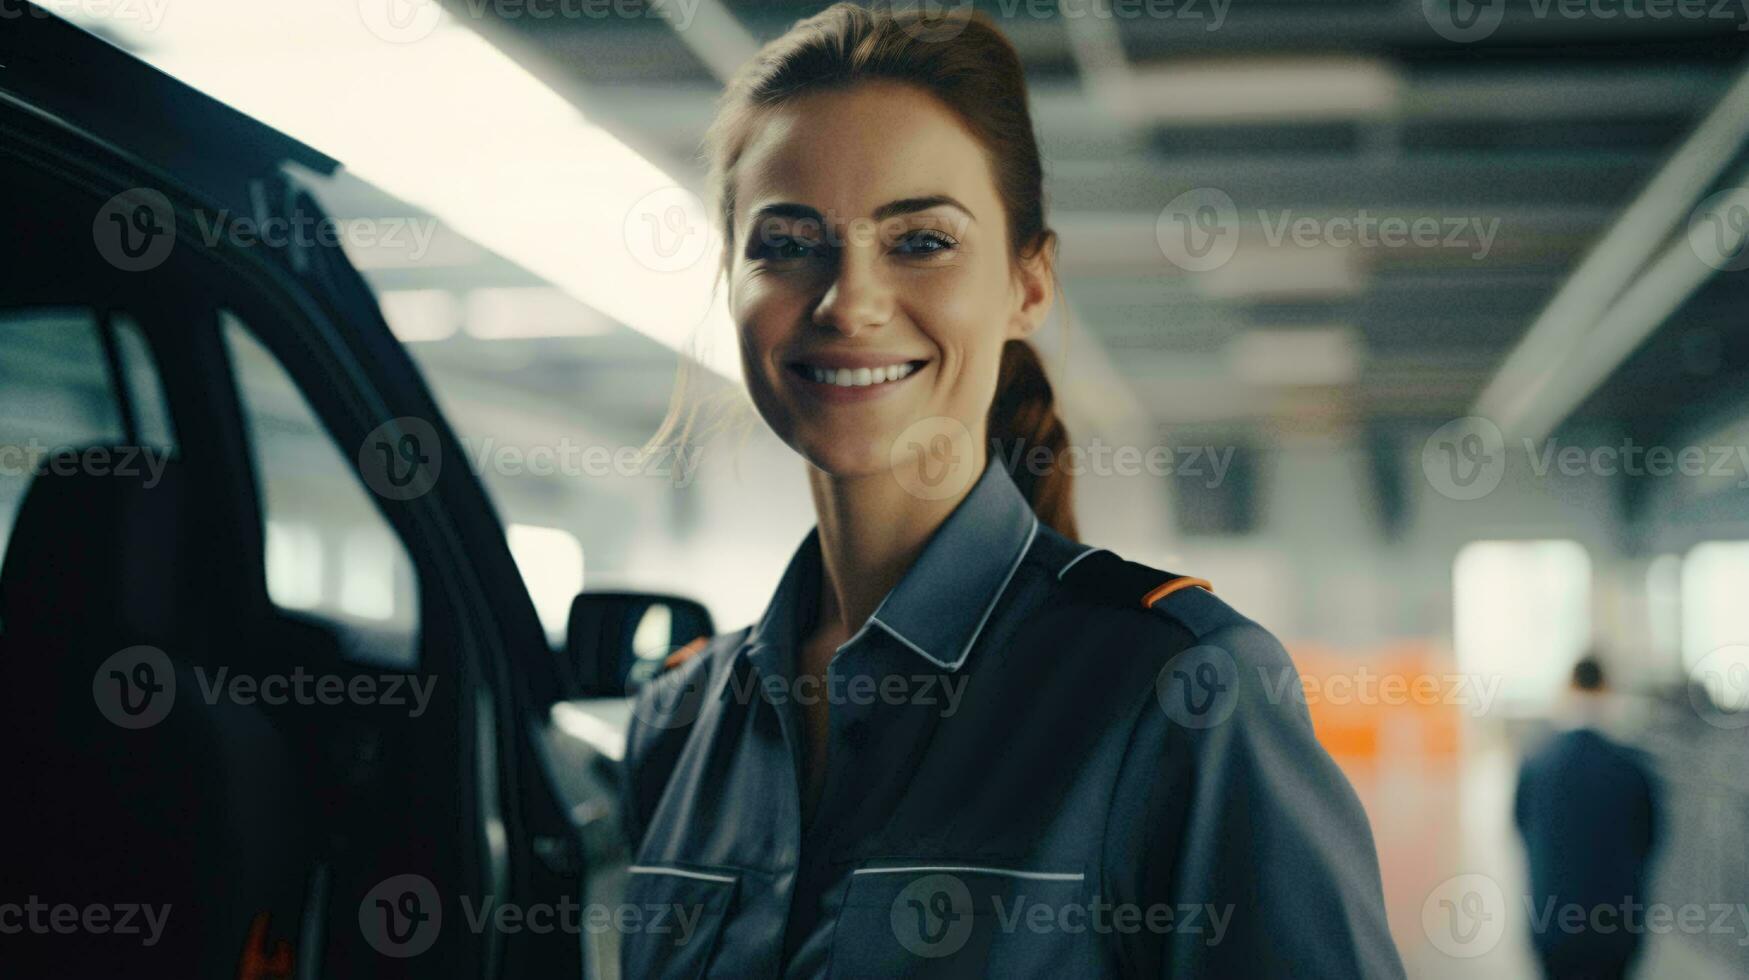 A woman in uniform standing next to a car AI Generated photo